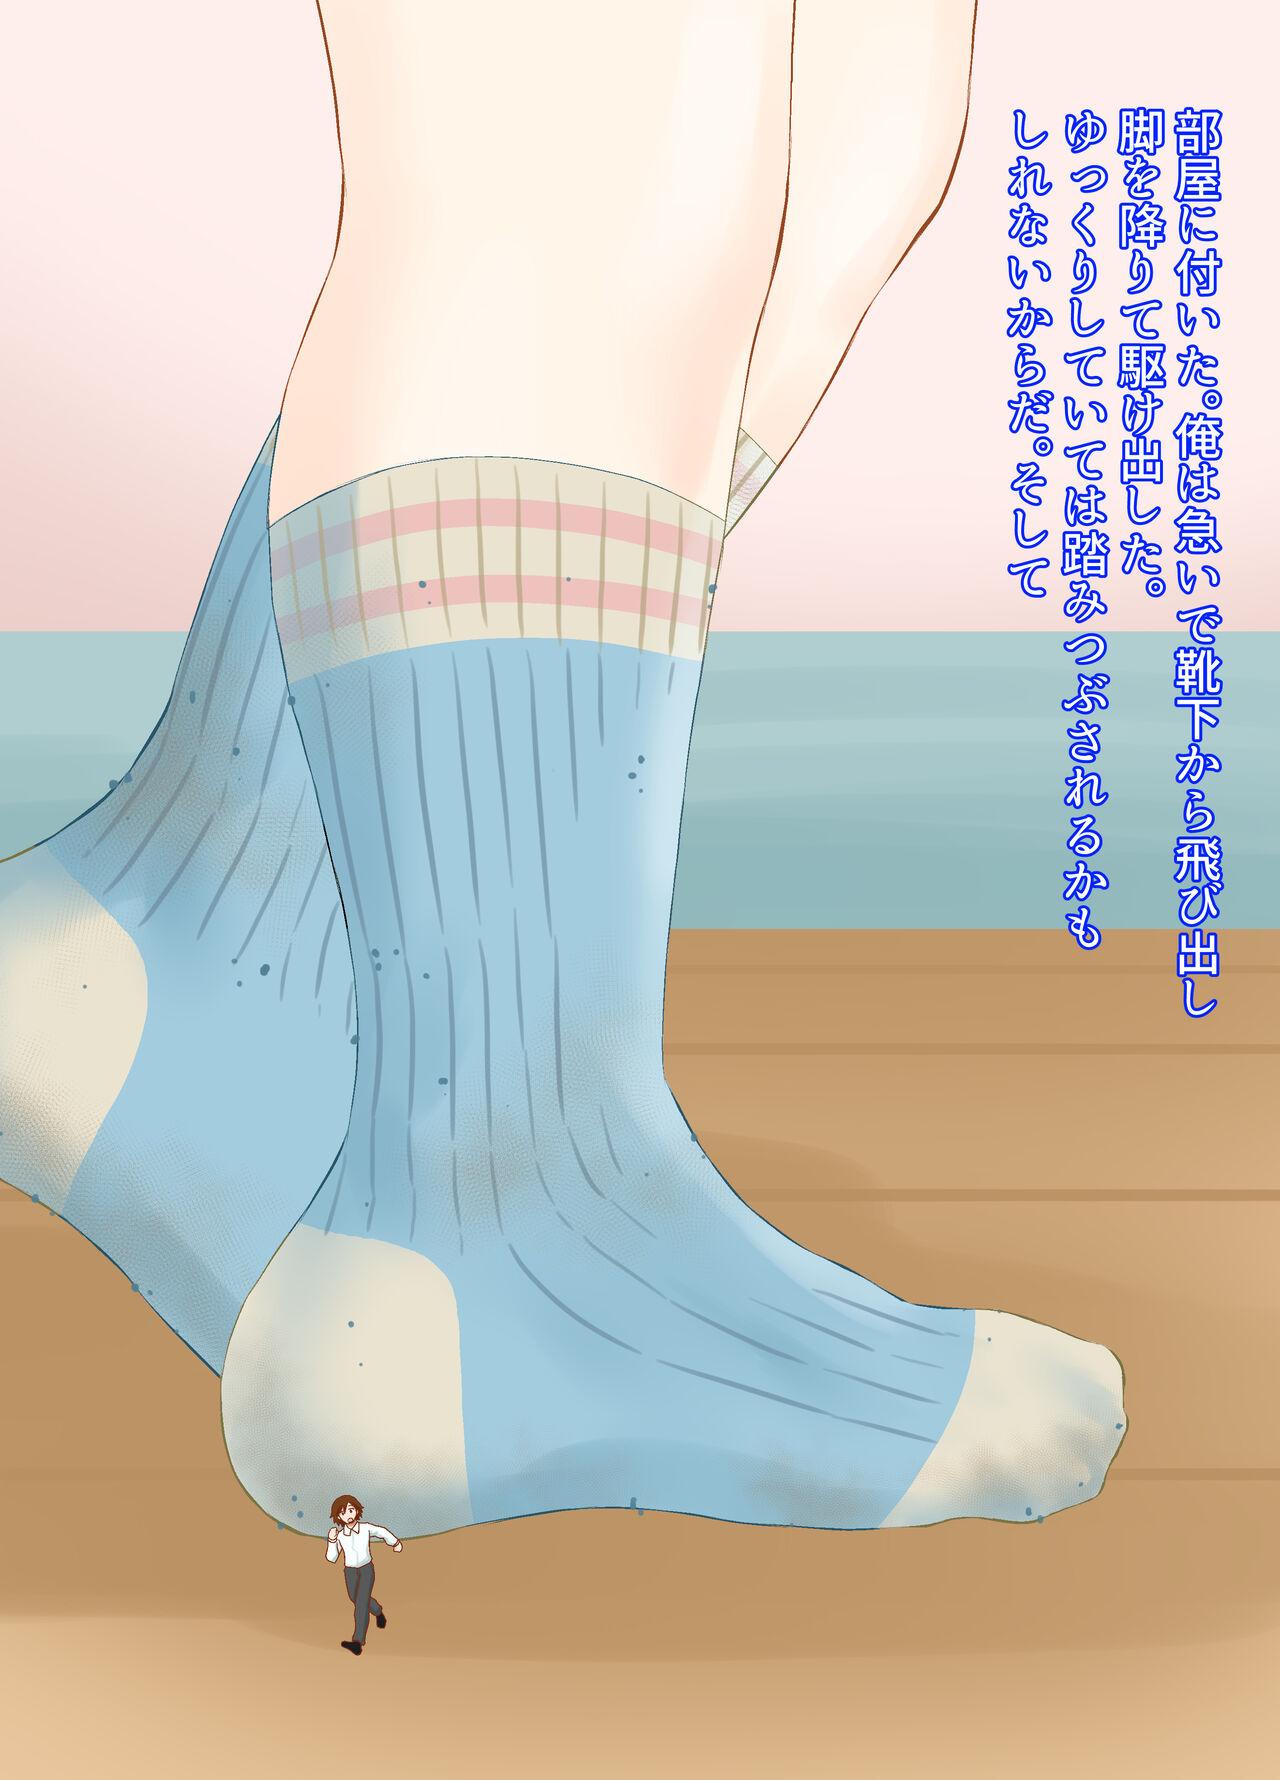 A CG collection of getting smaller and being stepped on by a girl 9